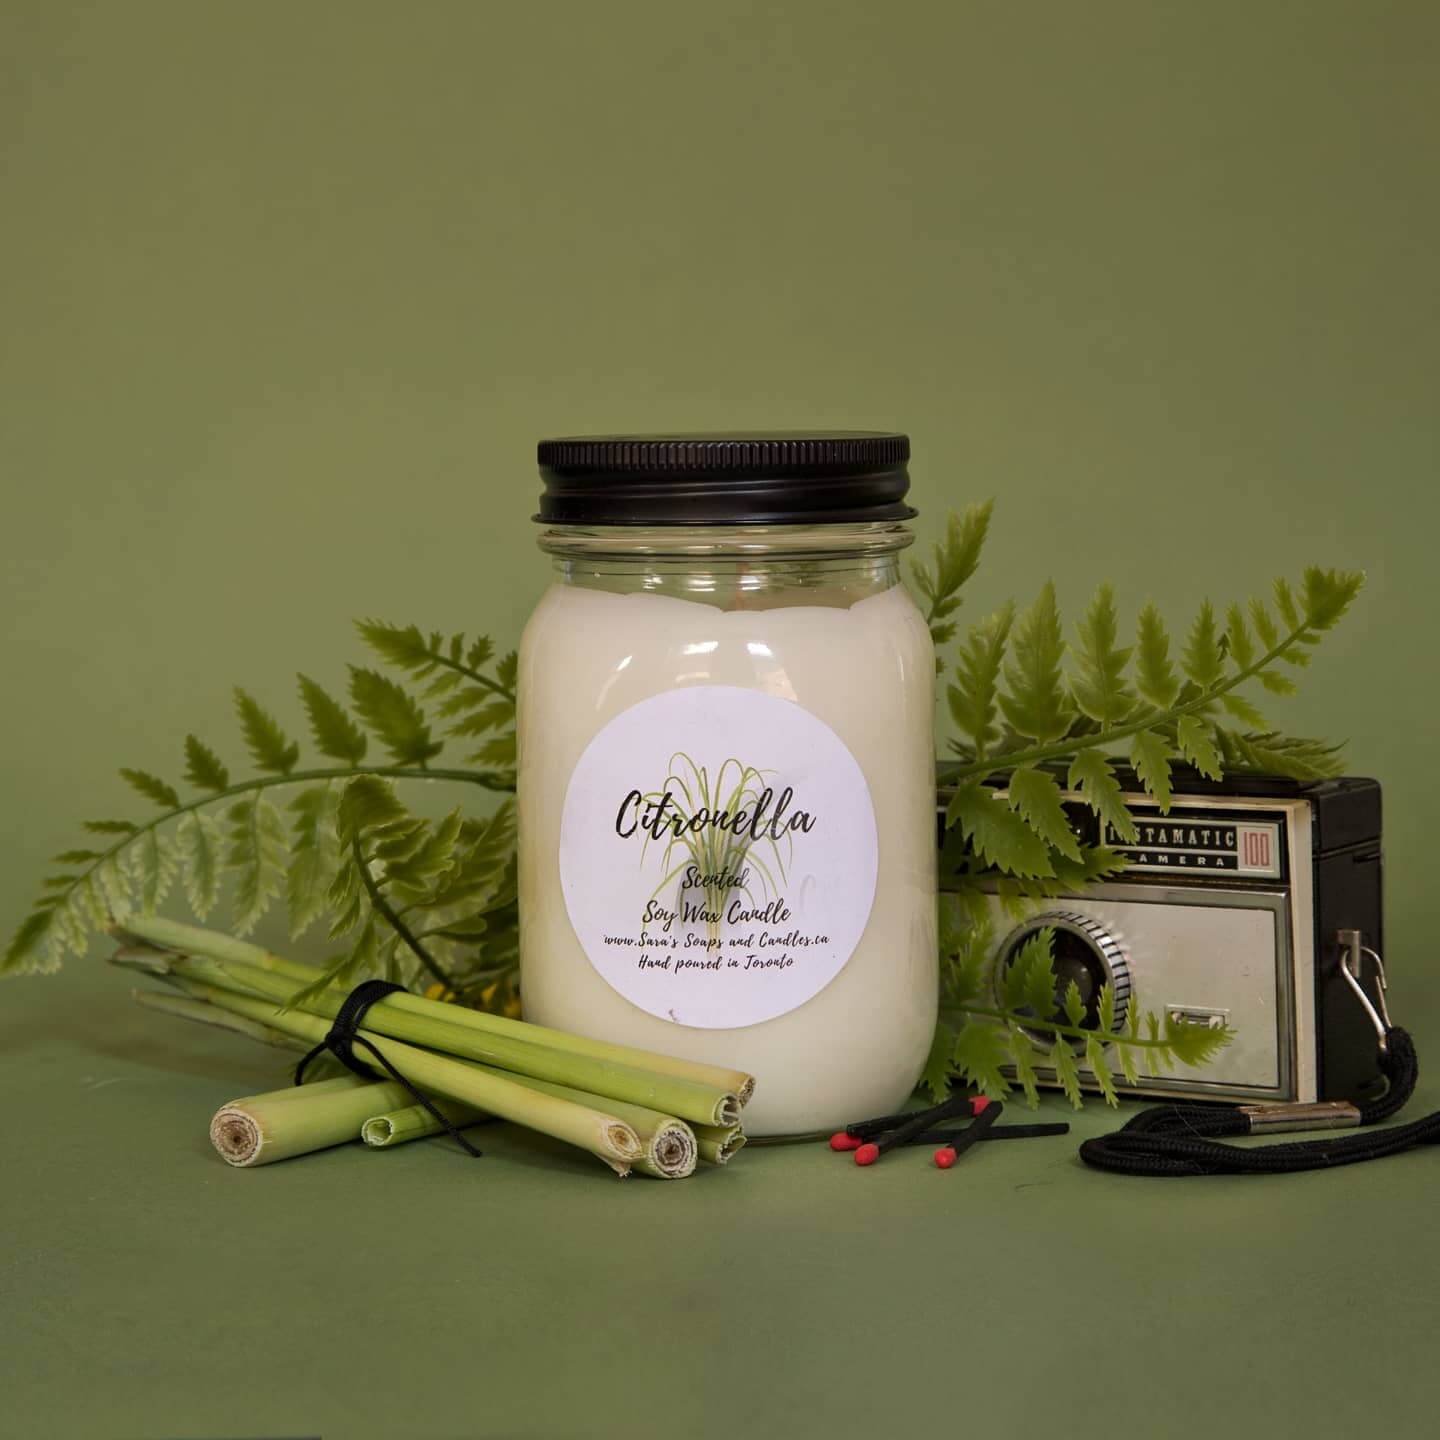 Citronella Soy Wax Candle aromatherapy Sara's Soaps and Candles Prettycleanshop